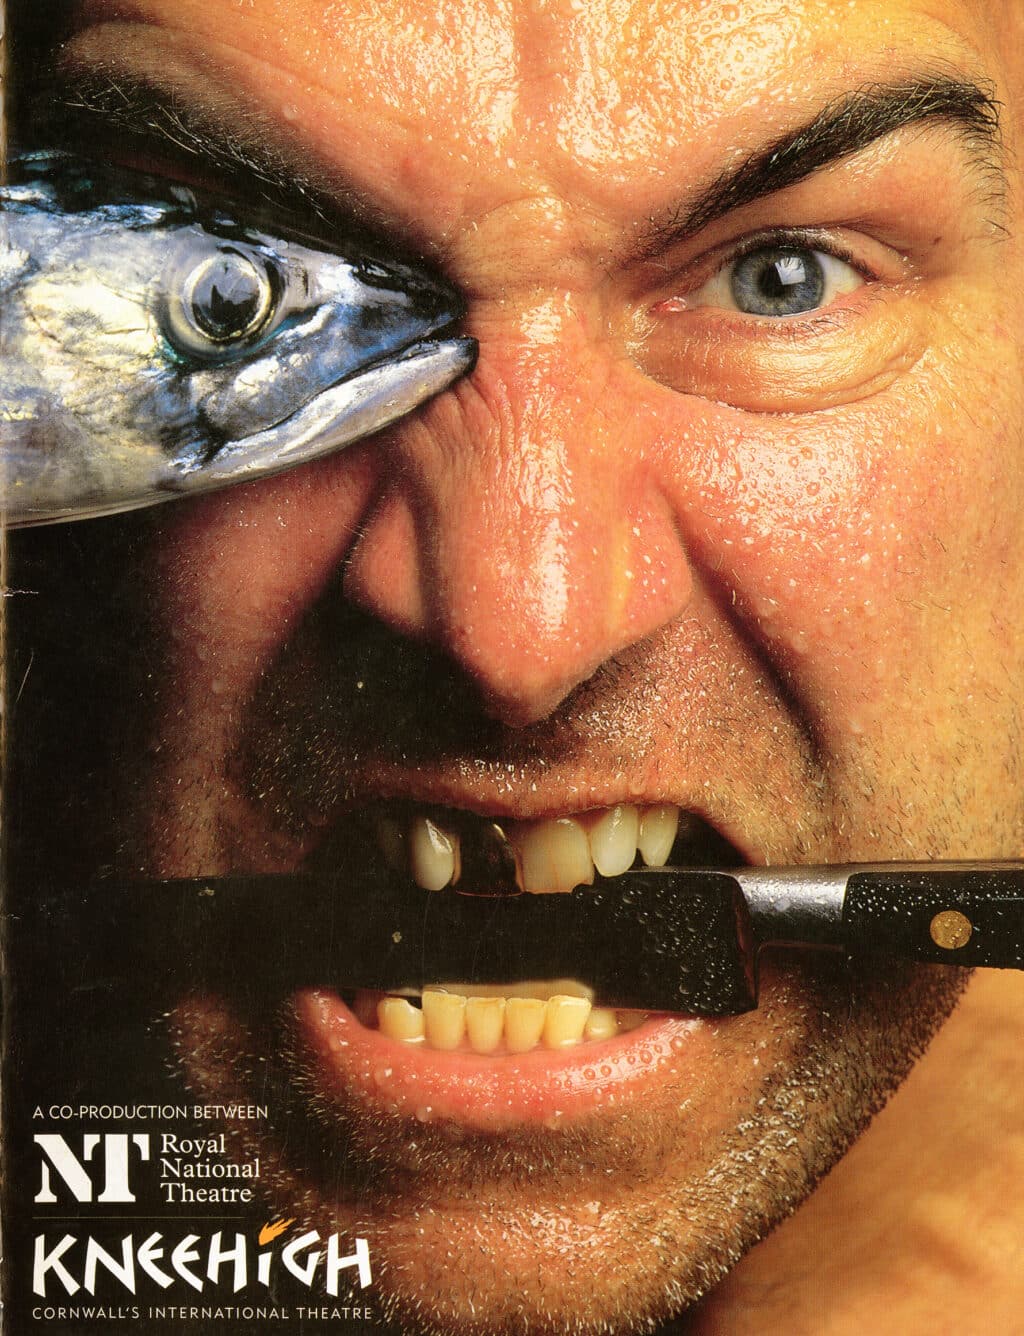 Programme features a close set photograph of a man's face. His right eye is obscured by the head of a mackerel and he holds a knife between his teeth - one of which is gold. His composure appears angry.